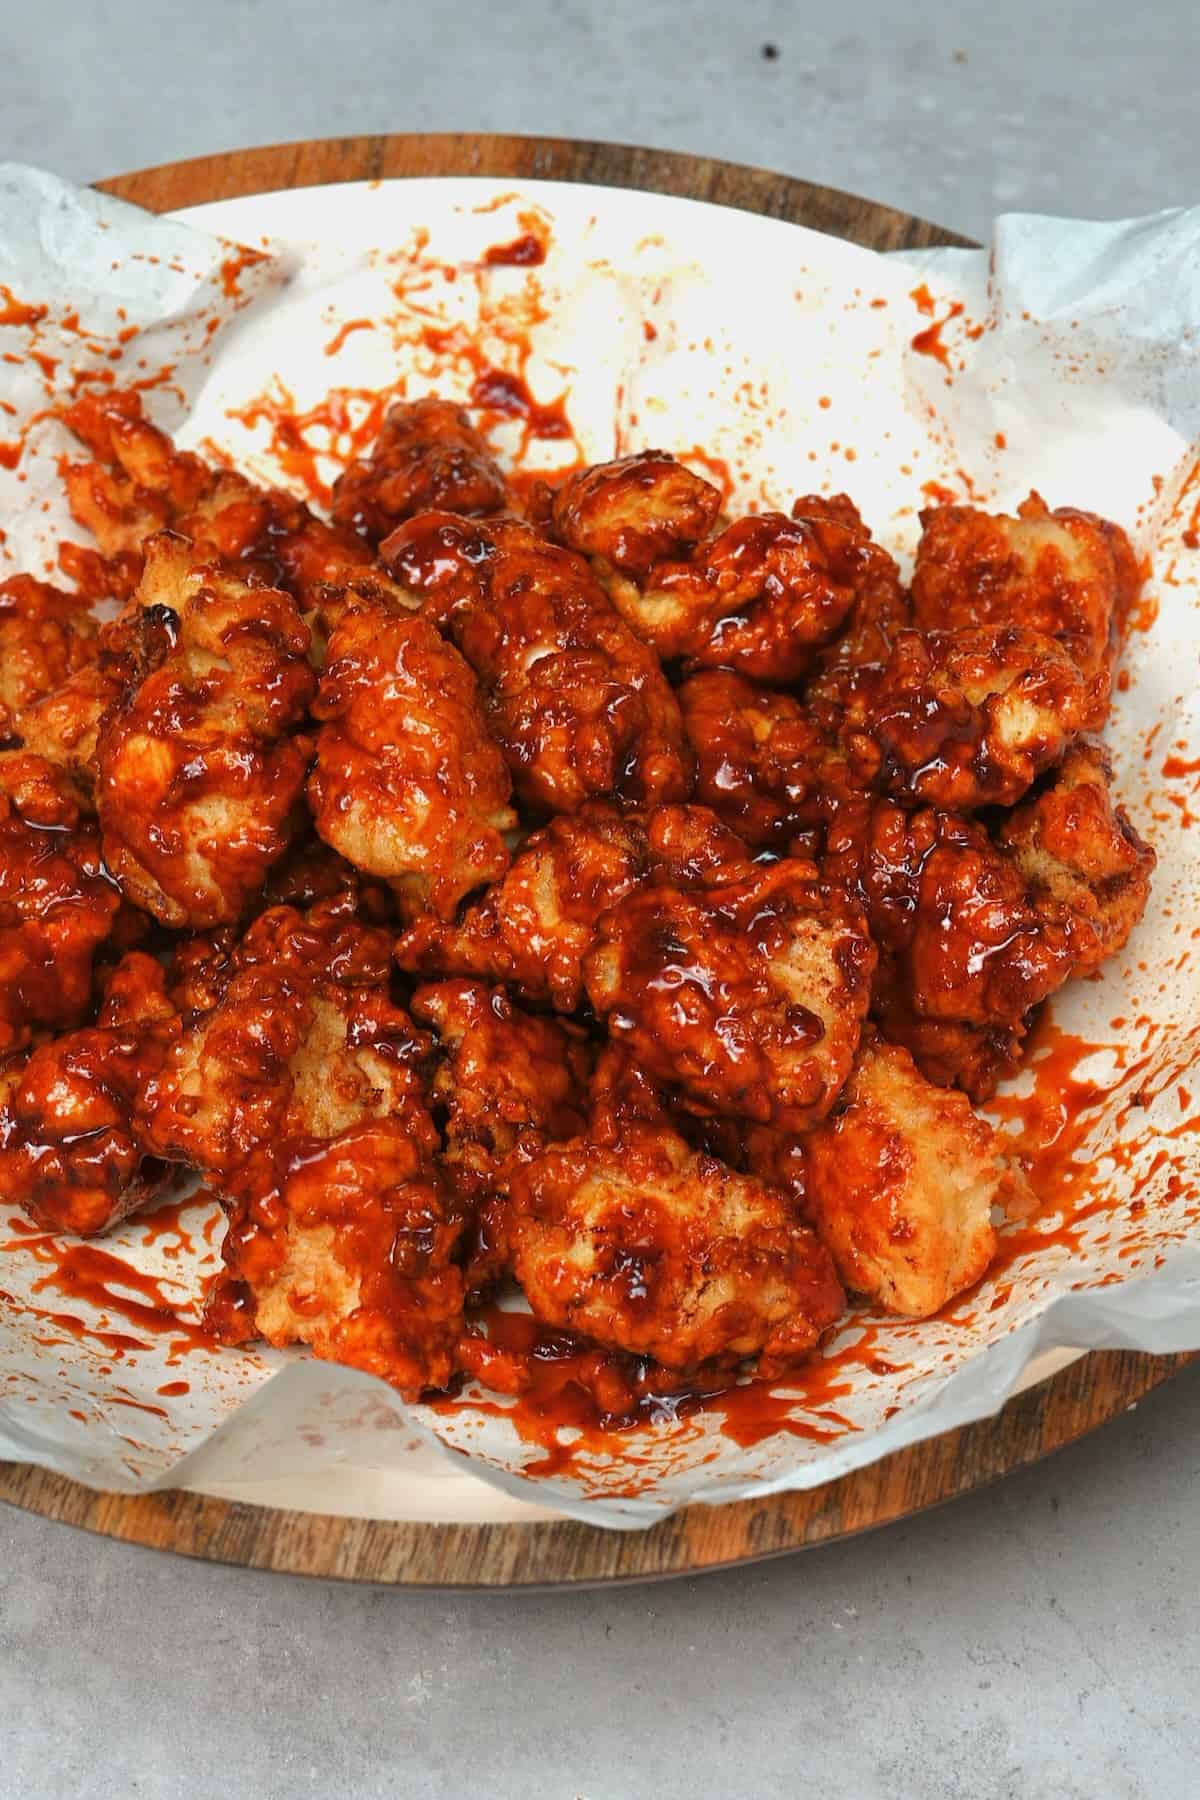 https://www.alphafoodie.com/wp-content/uploads/2023/08/Korean-Fried-Chicken-Fried-chicken-covered-with-red-chili-sauce.jpeg